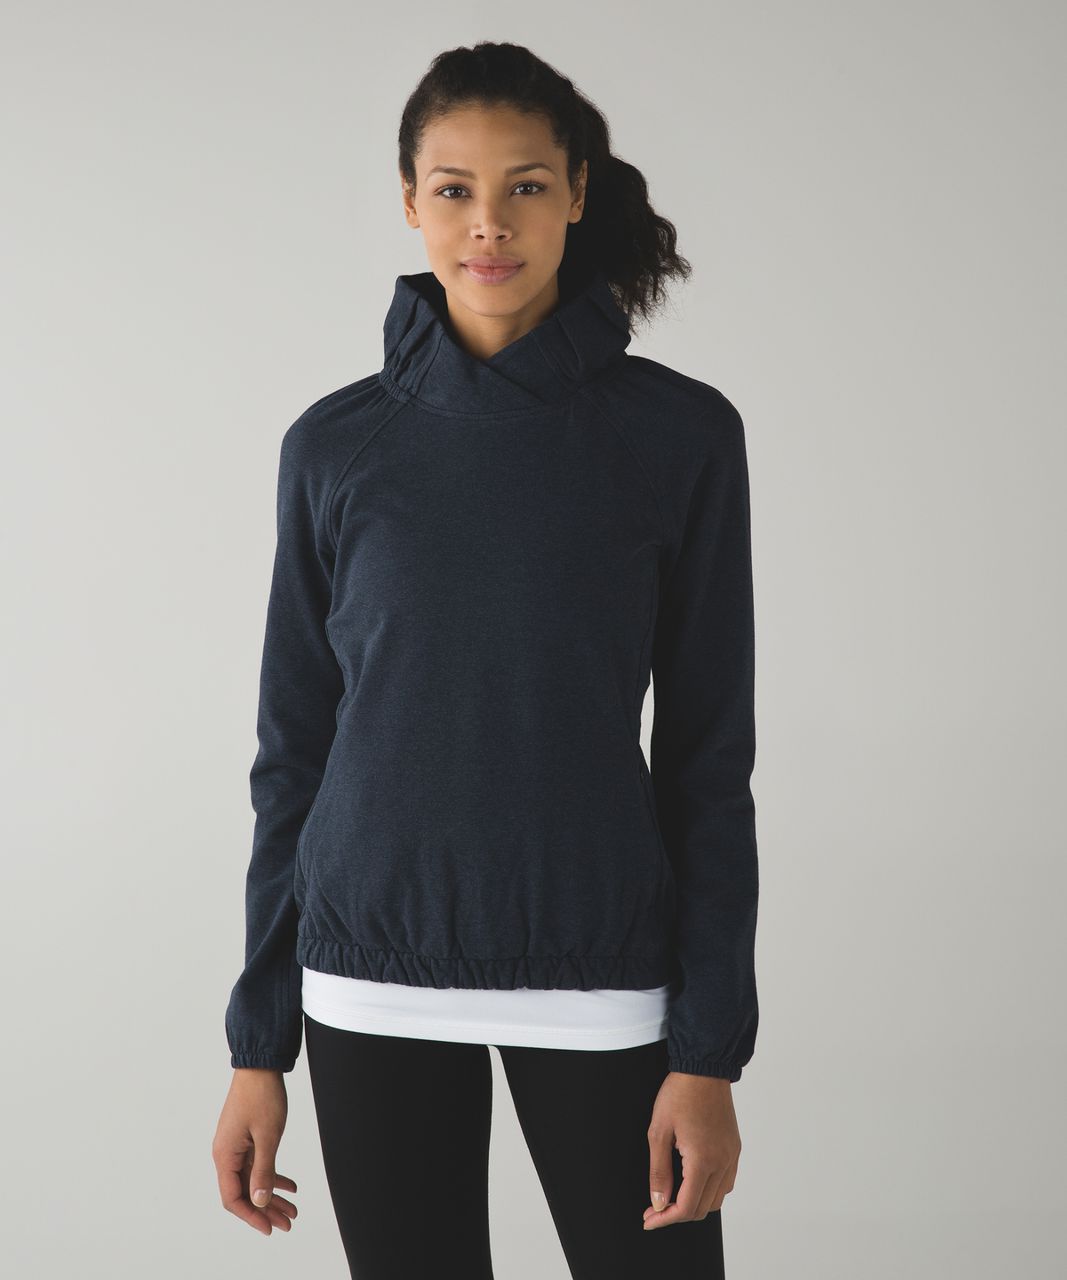 Lululemon After All Pullover - Heathered Naval Blue